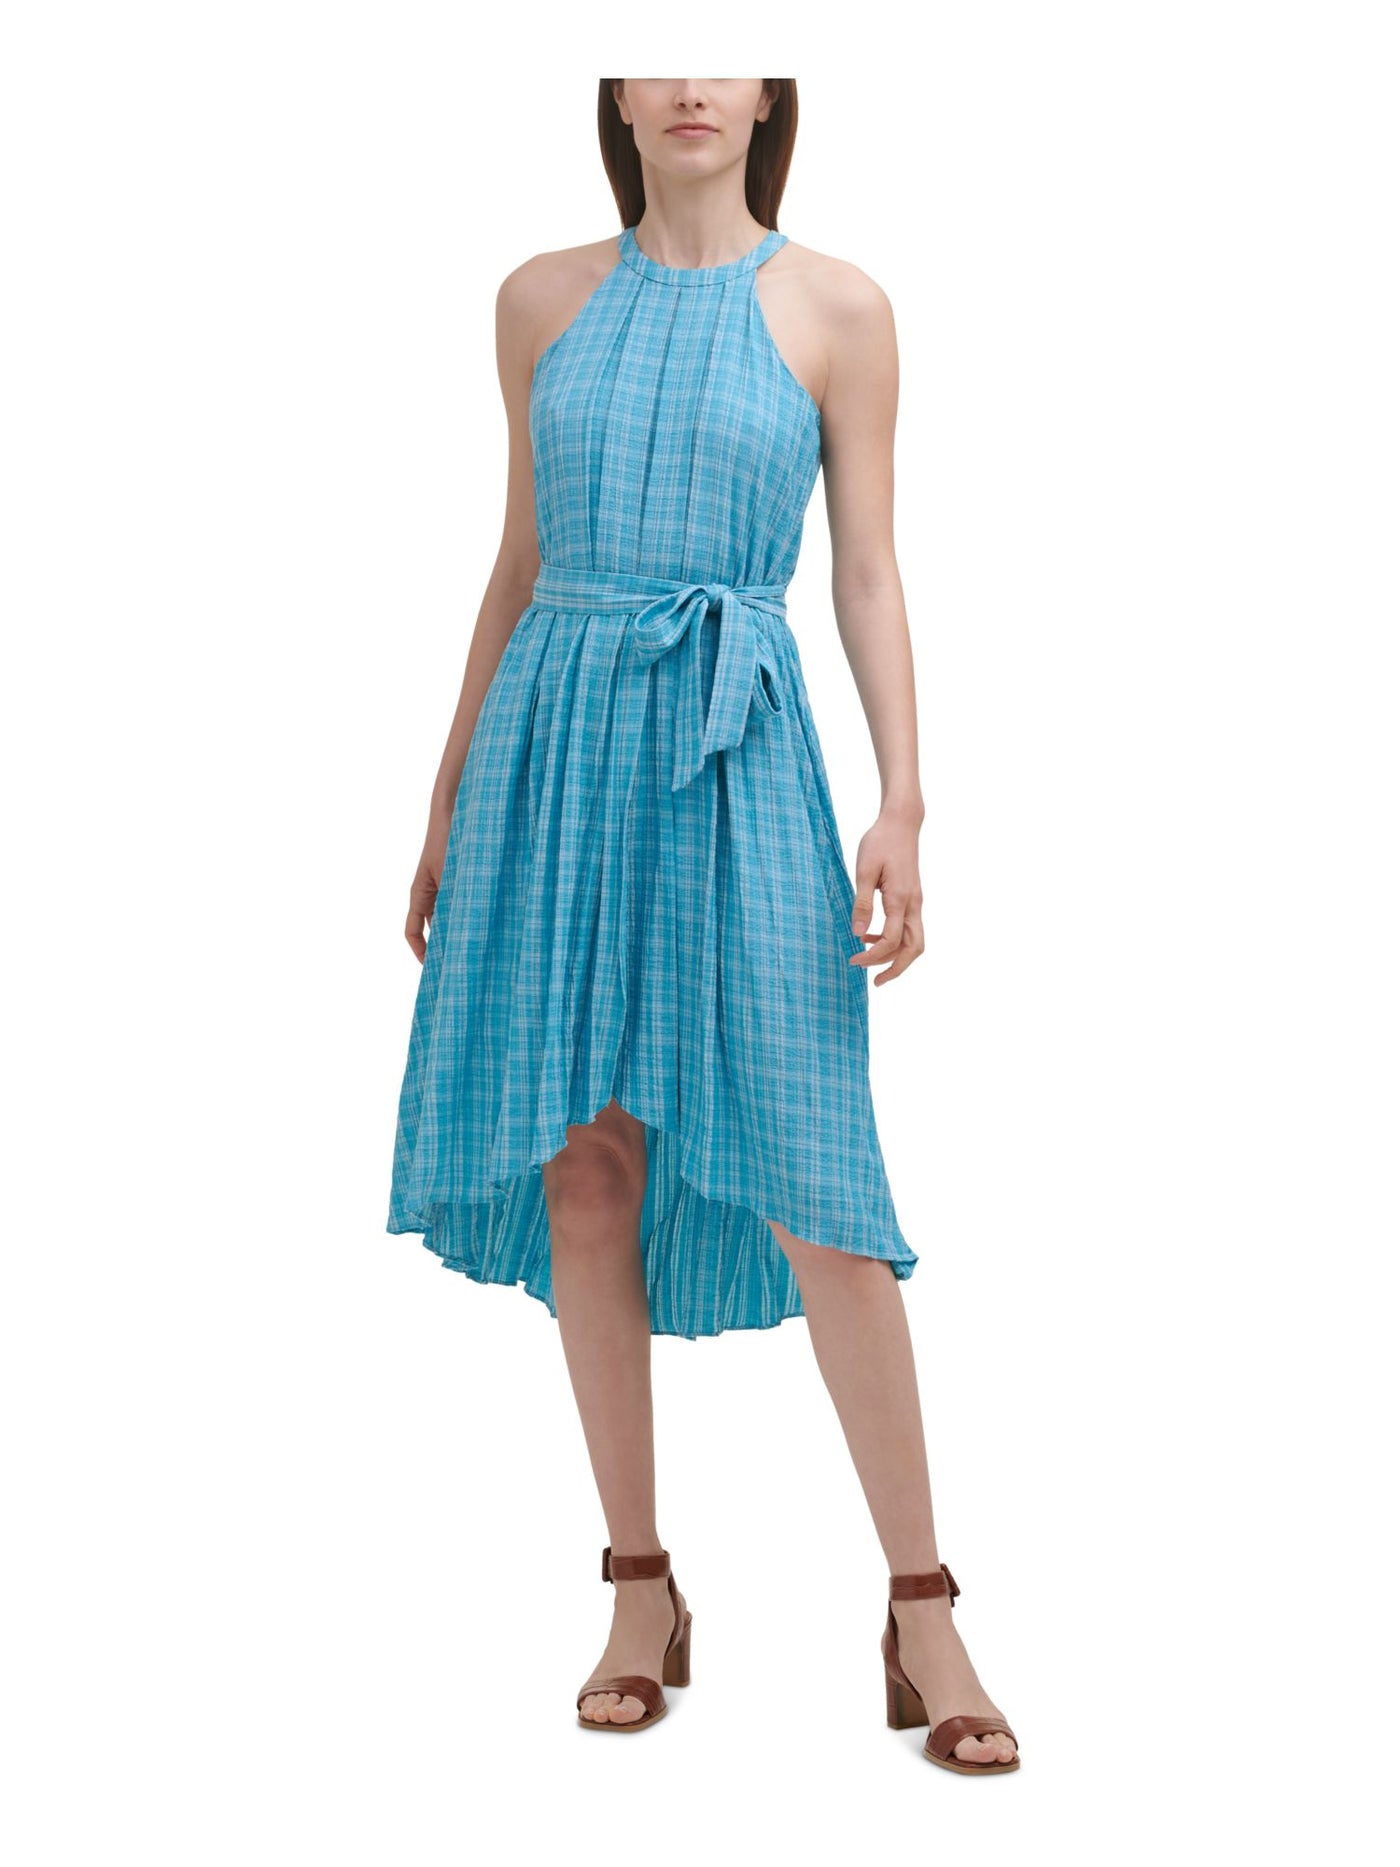 CALVIN KLEIN Womens Turquoise Zippered Belted Pleated Hi-lo Hem Back Cut Out Plaid Sleeveless Halter Midi Fit + Flare Dress 12